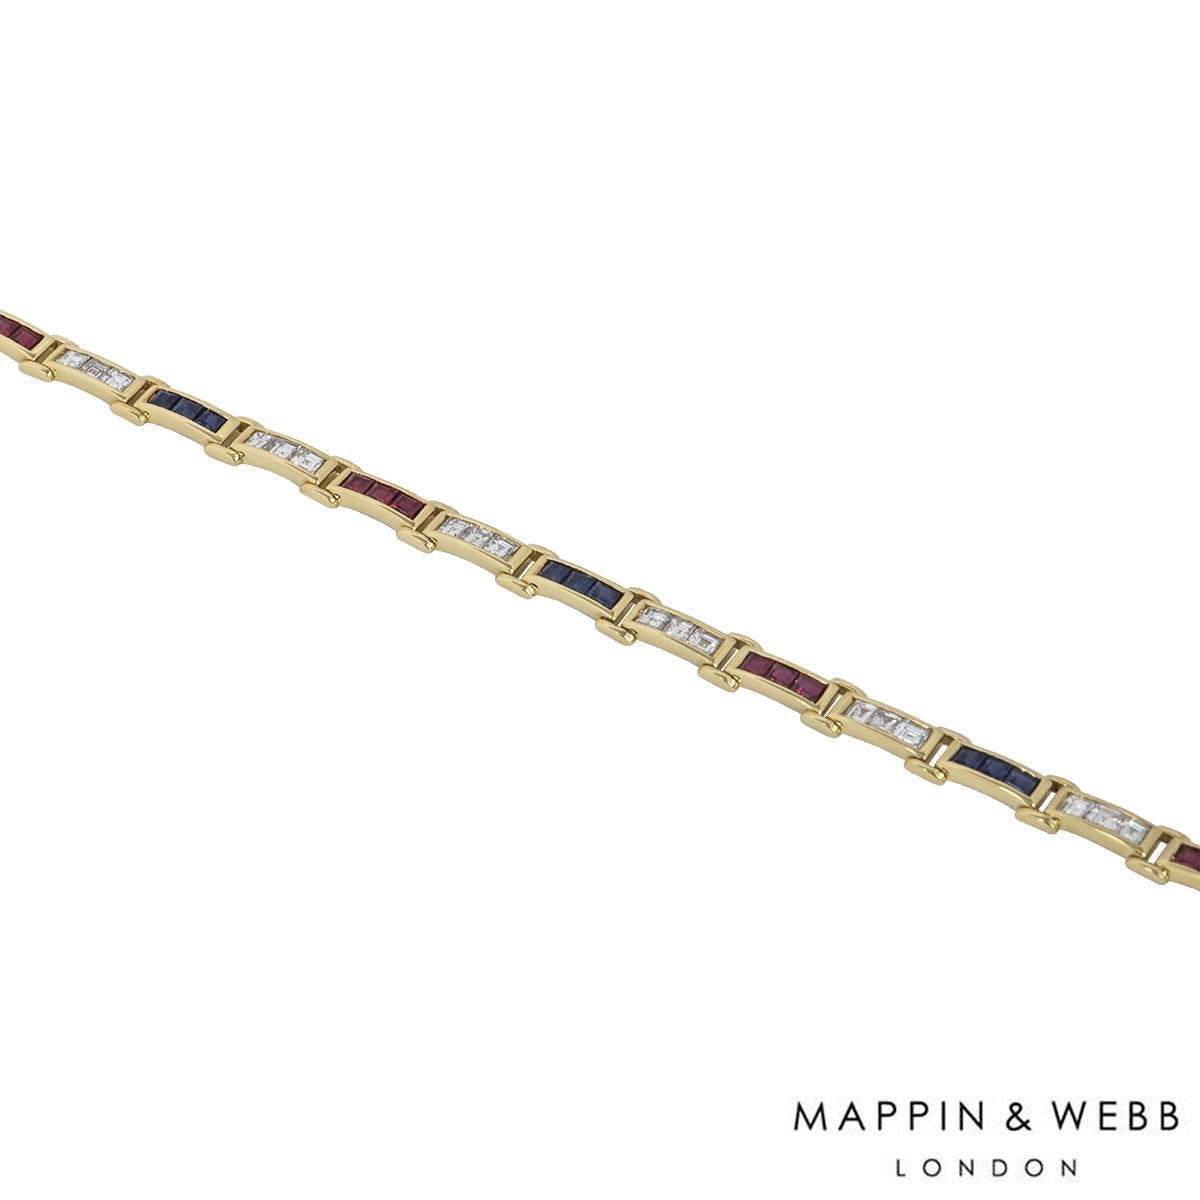 An 18k yellow gold diamond and multi-gem bracelet by Mappin & Webb. The bracelet comprises of diamonds, sapphires and rubies alternating with each other in rows of three. The bracelet features 24 square modified brilliant diamonds, 12 sapphires and